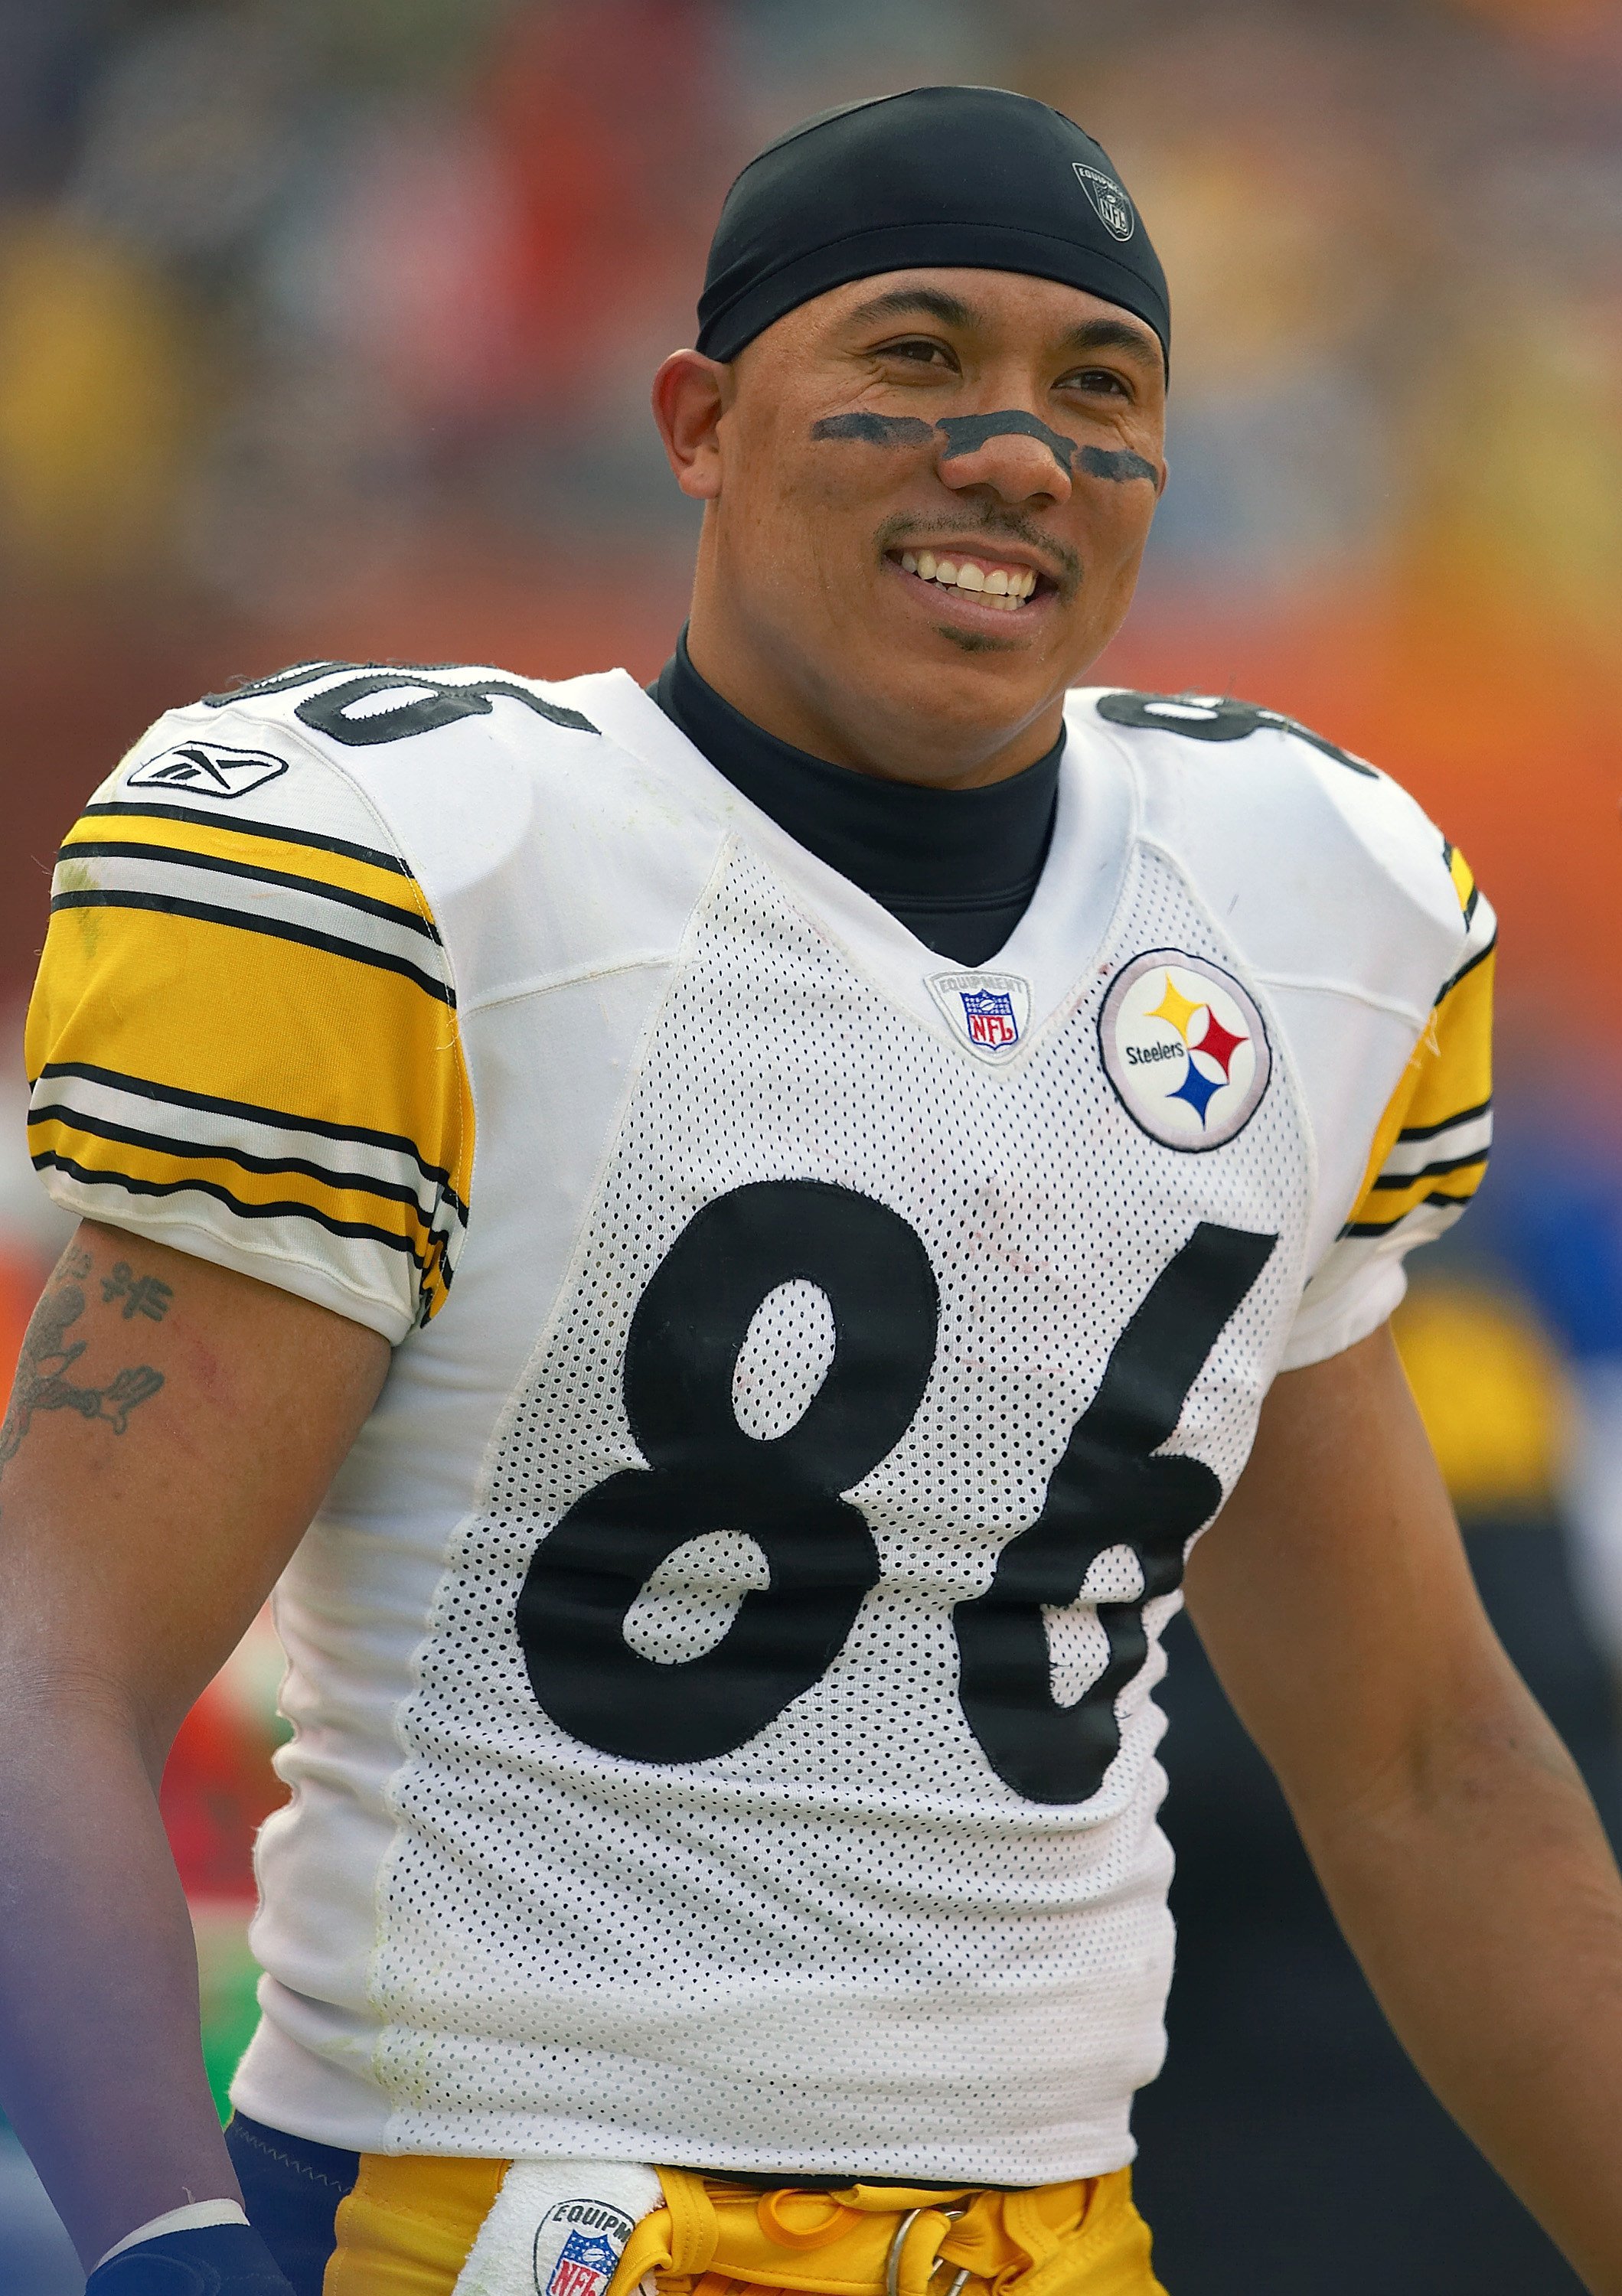 Hines Ward, number 86, on the field at a Steelers game